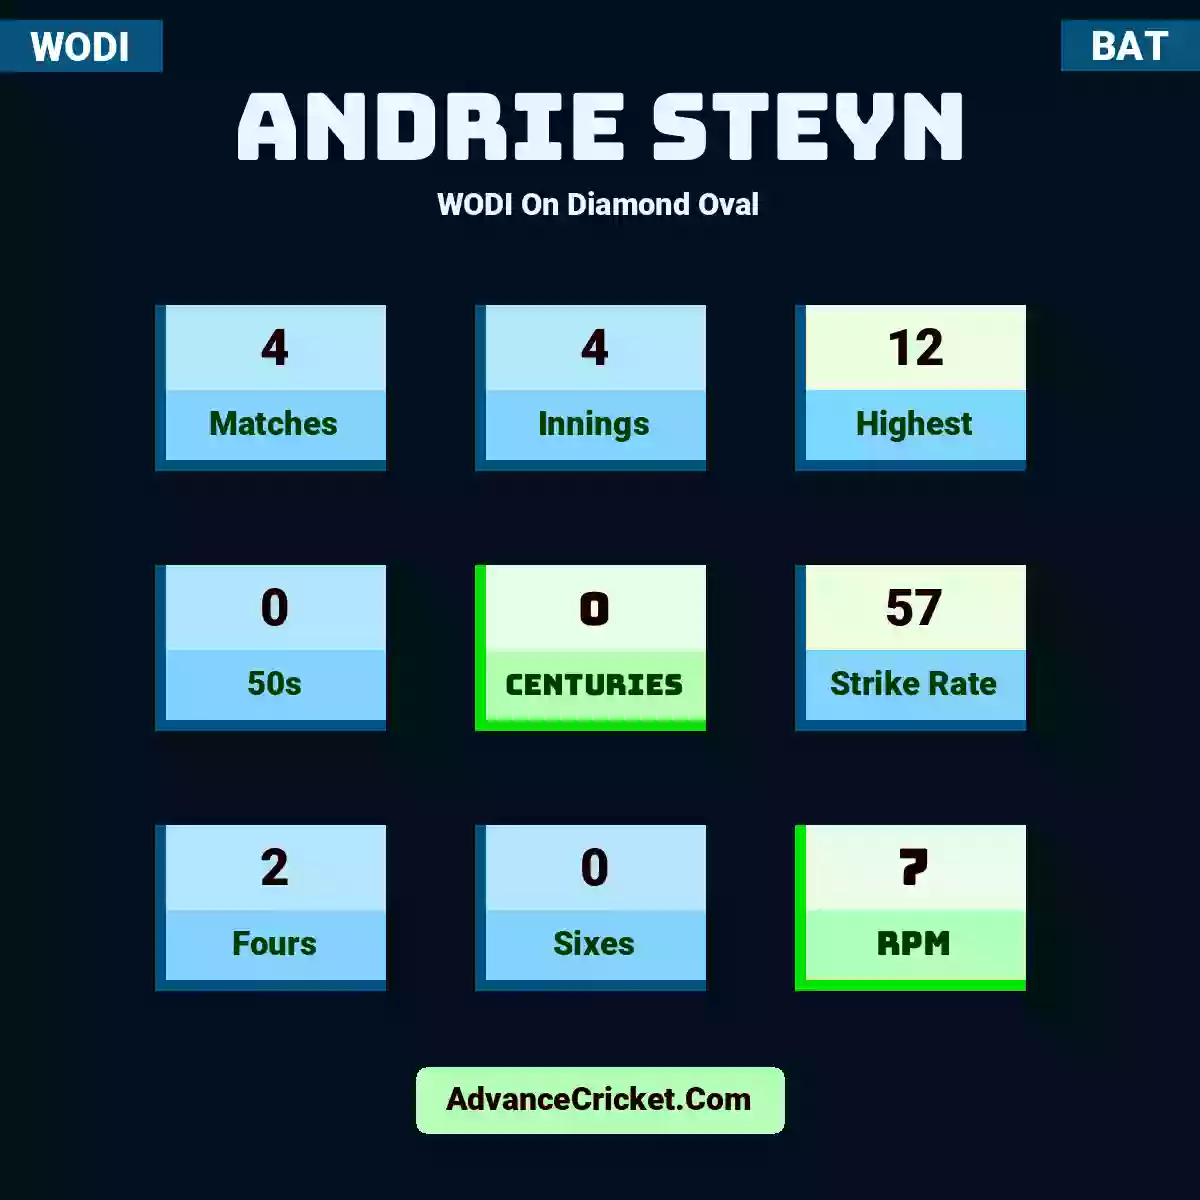 Andrie Steyn WODI  On Diamond Oval, Andrie Steyn played 4 matches, scored 12 runs as highest, 0 half-centuries, and 0 centuries, with a strike rate of 57. A.Steyn hit 2 fours and 0 sixes, with an RPM of 7.